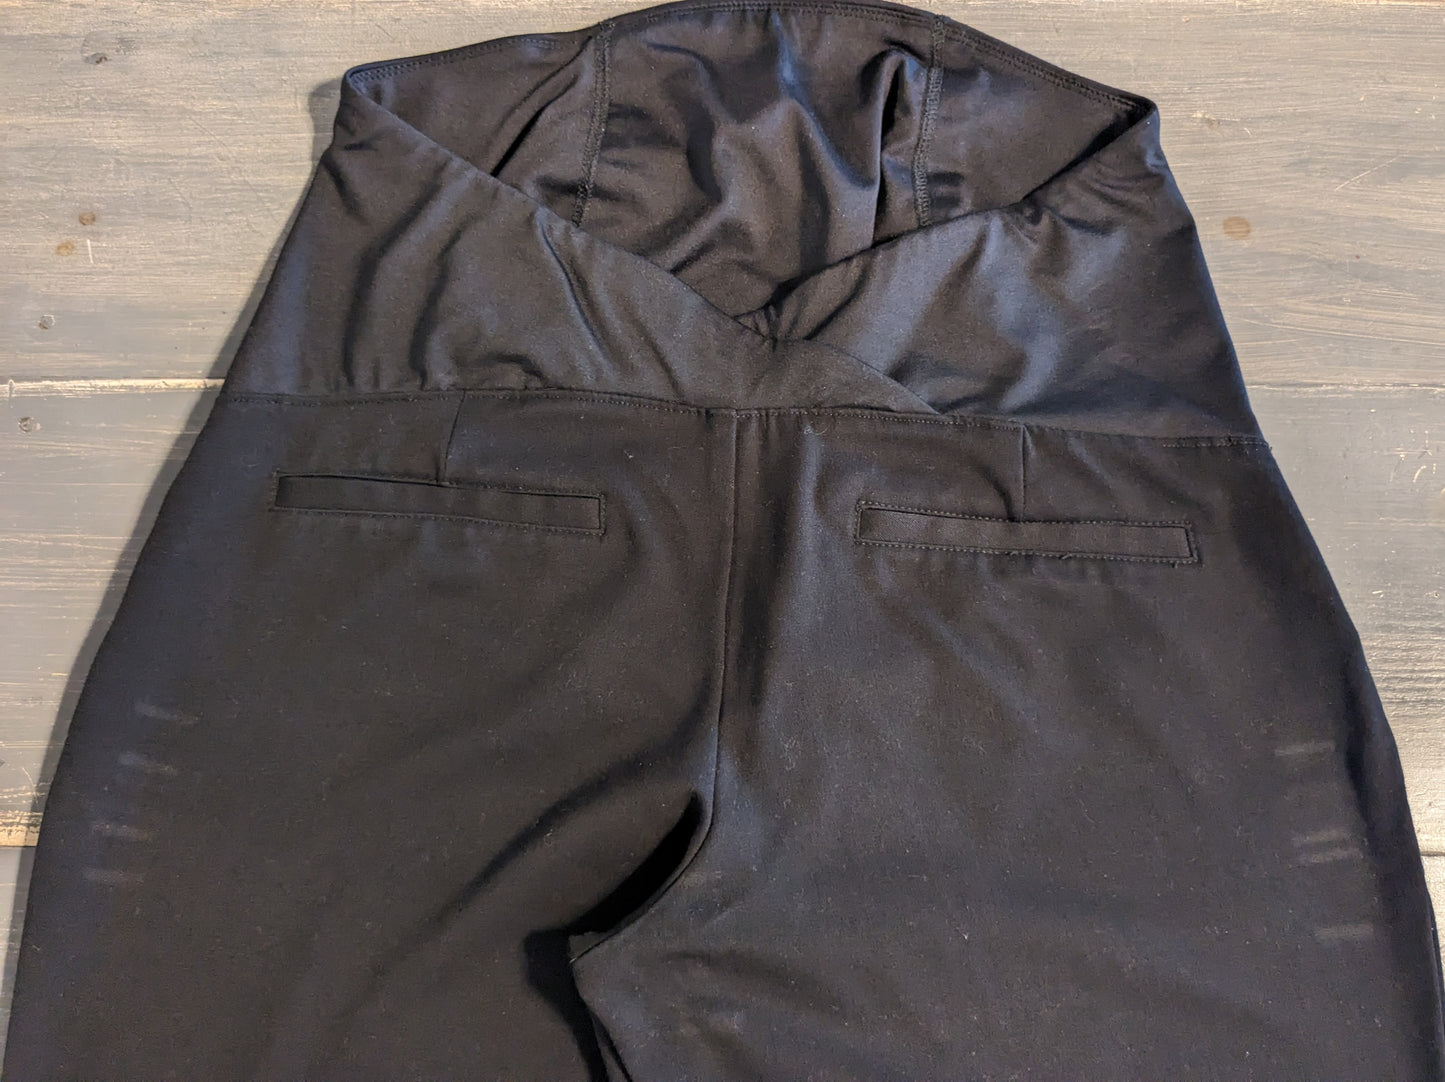 Convertible panel 30" bootcut trousers, Black